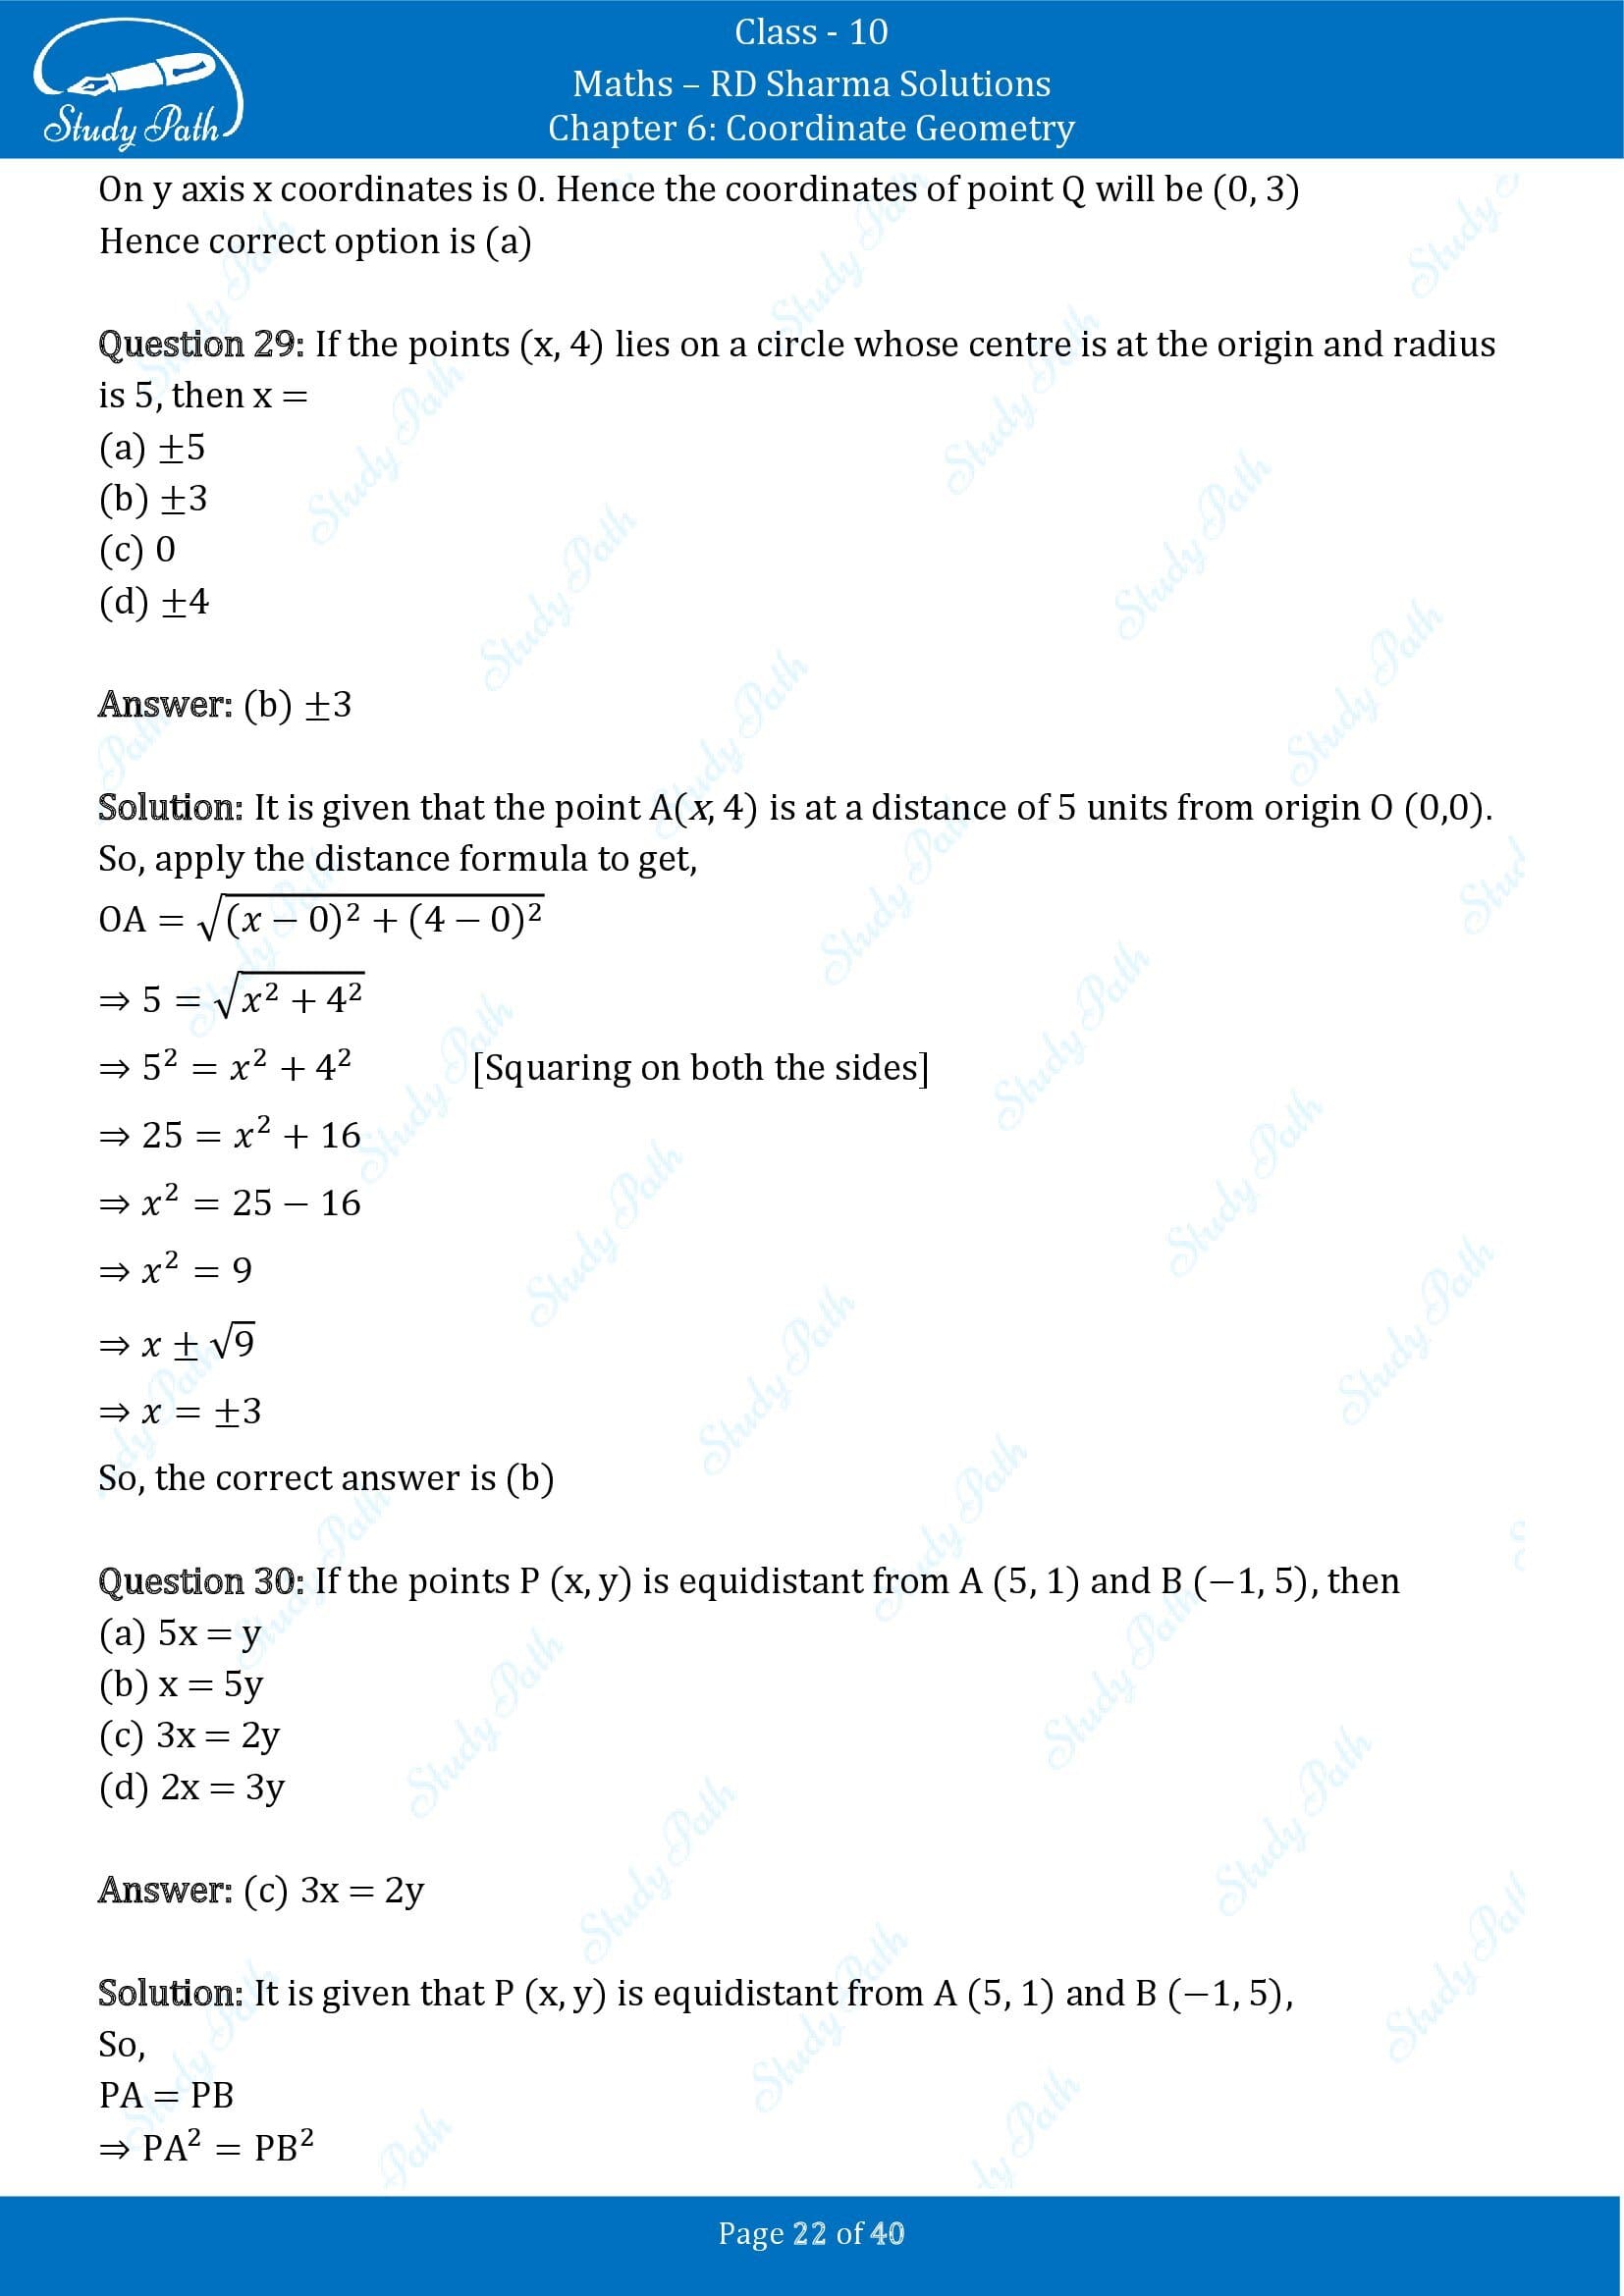 RD Sharma Solutions Class 10 Chapter 6 Coordinate Geometry Multiple Choice Question MCQs 00022